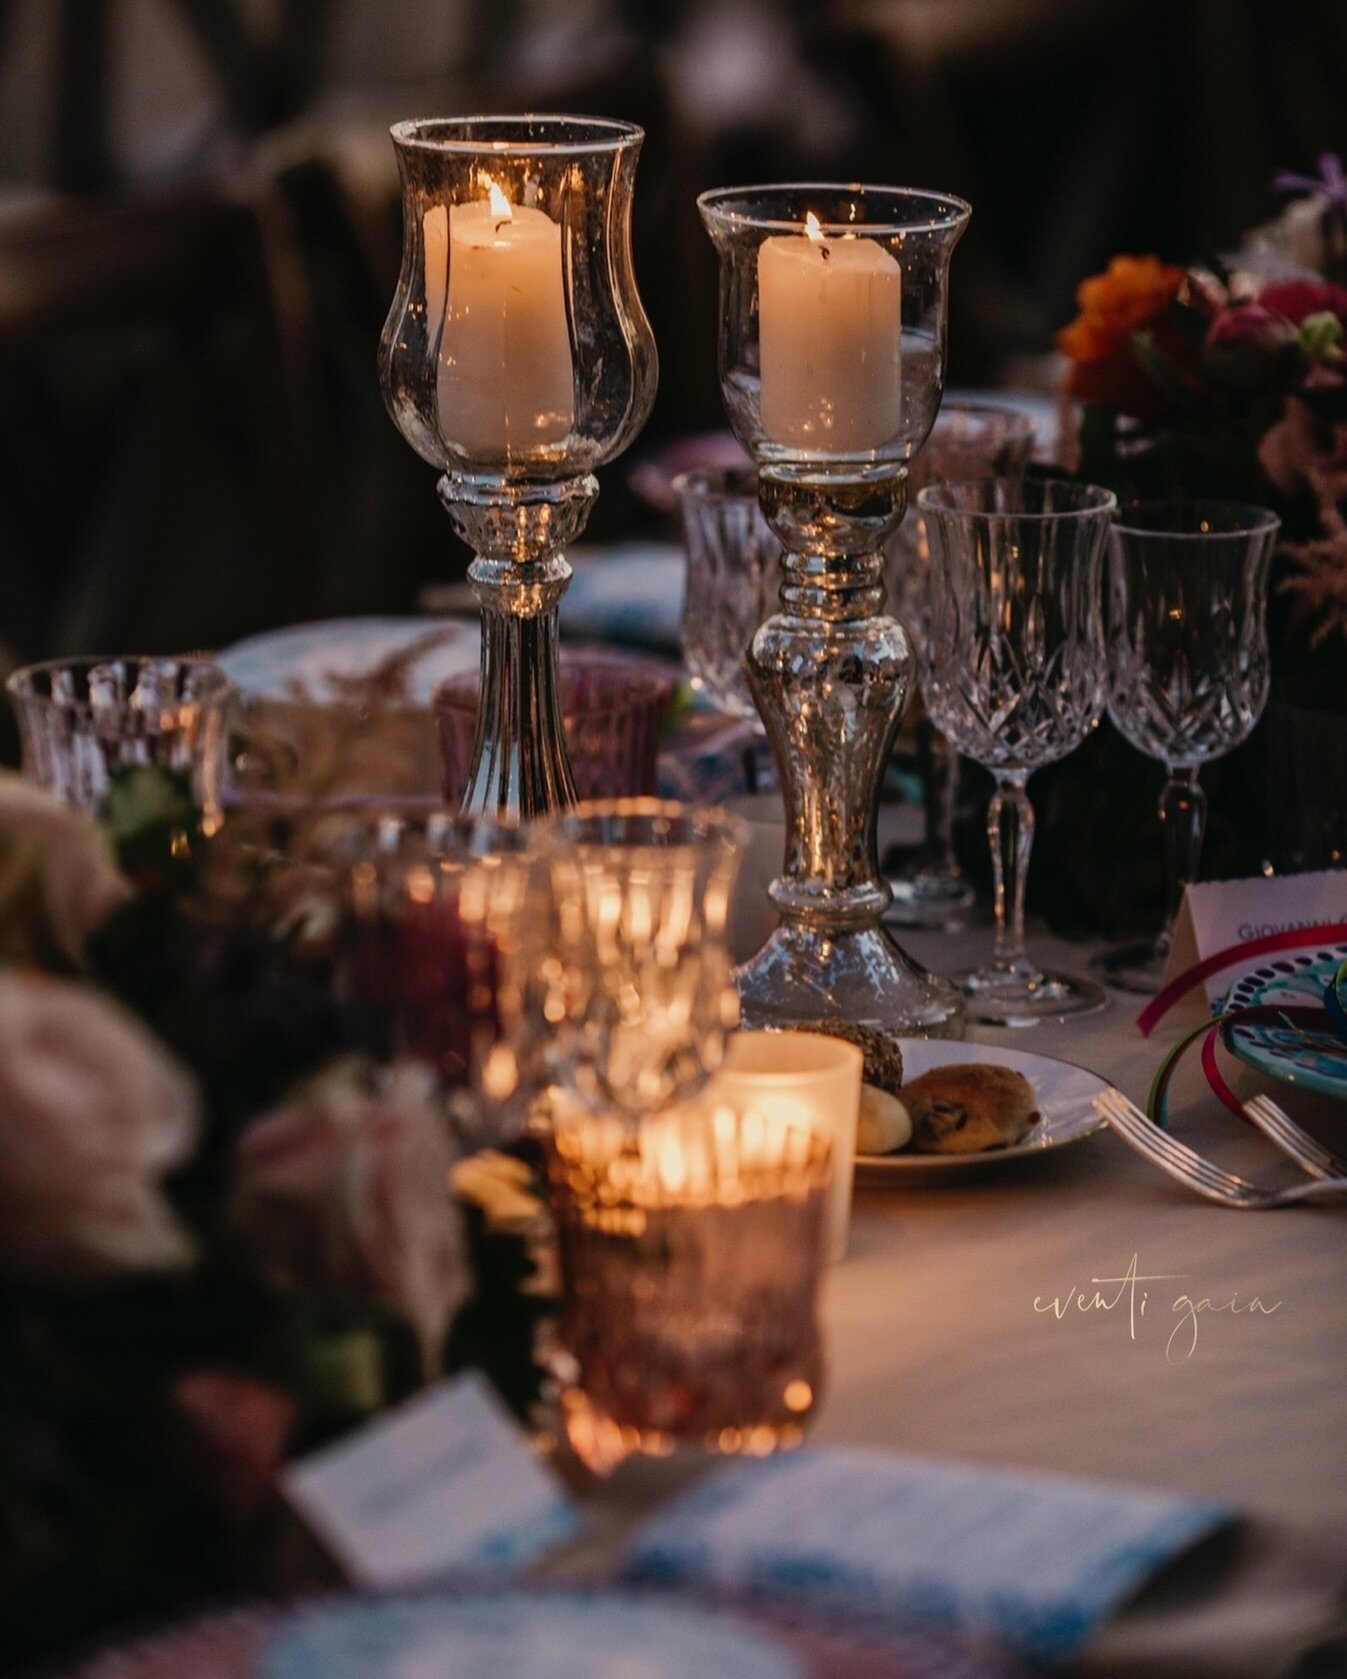 Enchanting tablescape brought to life by the flickering magic of candles! ✨ 

#TableDecor #CandlelitCharm #WeddingDecor #ElegantTouches #candles #weddinginspo #tailormade #bespokeevents #miseenplace #tablesetup #tabledecors